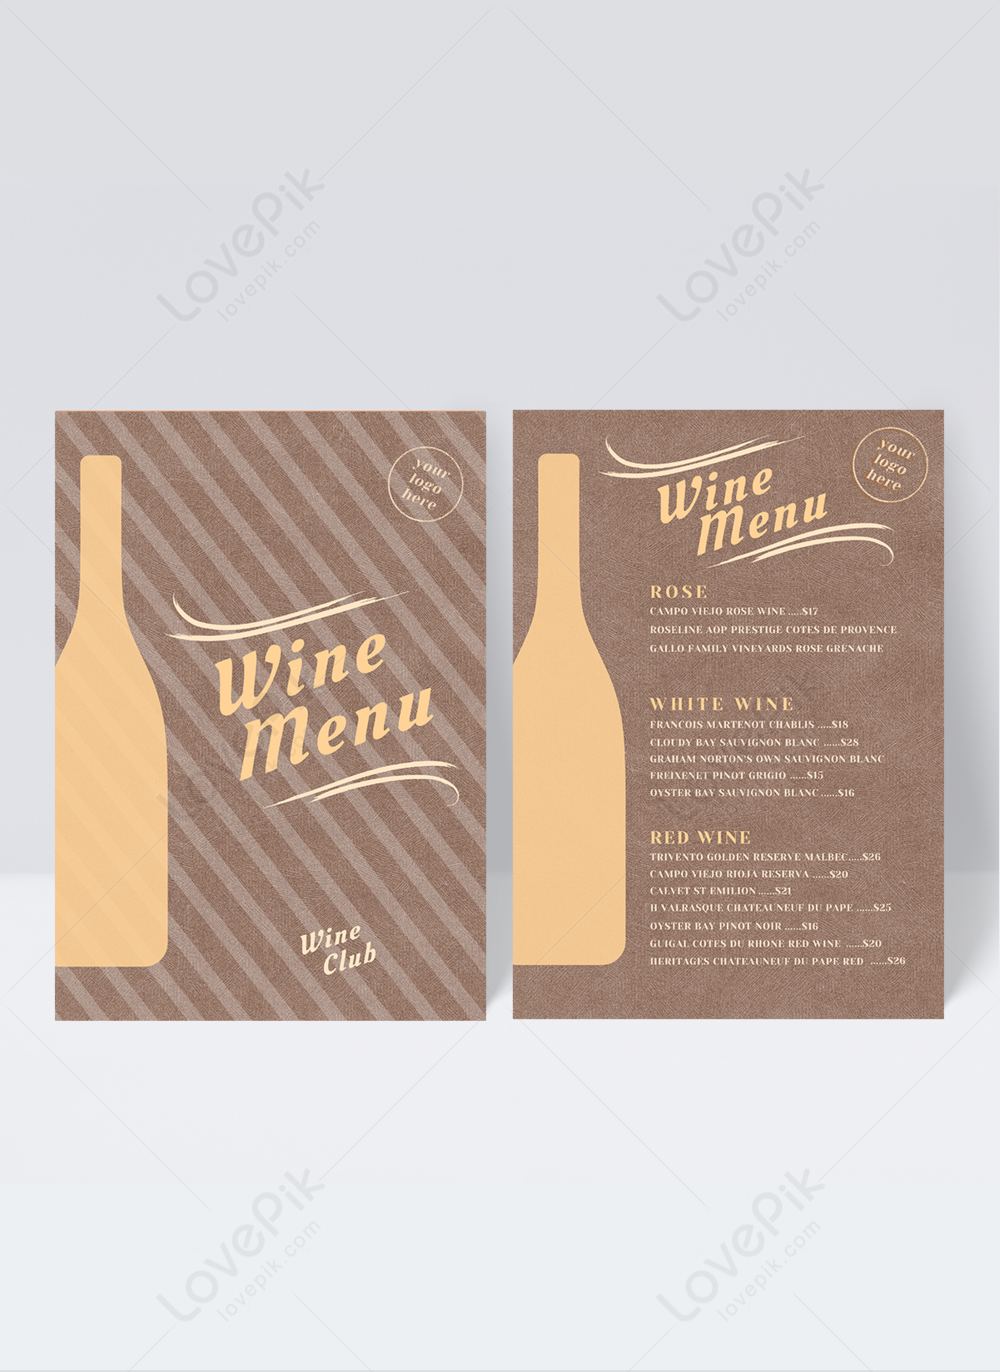 Wine elements winery menu template image_picture free download With Regard To Free Wine Menu Template